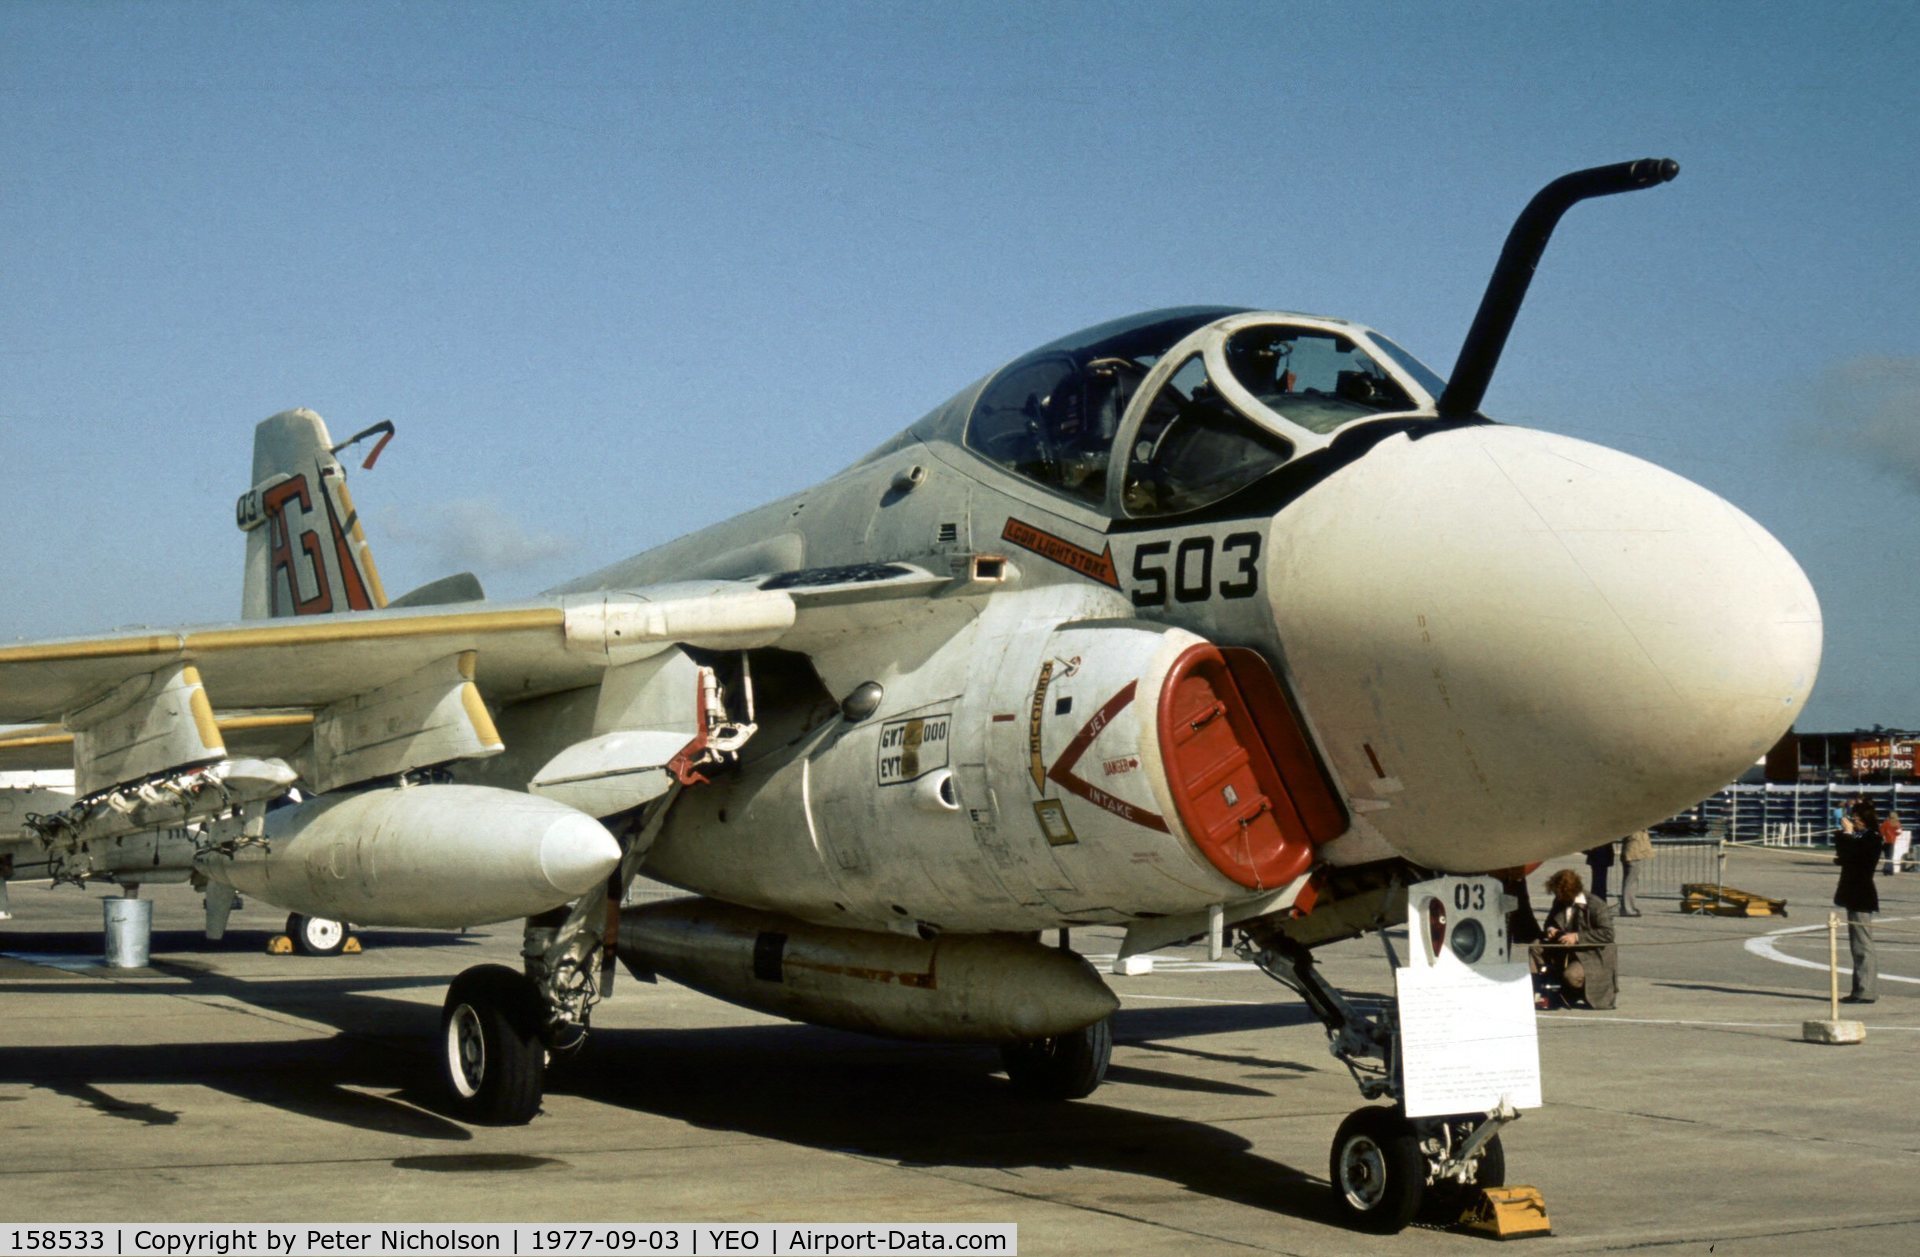 158533, Grumman A-6E Intruder C/N I-516, Another view of VA-65's A-6E Intruder at the 1977 RNAS Yeovilton Air Day.